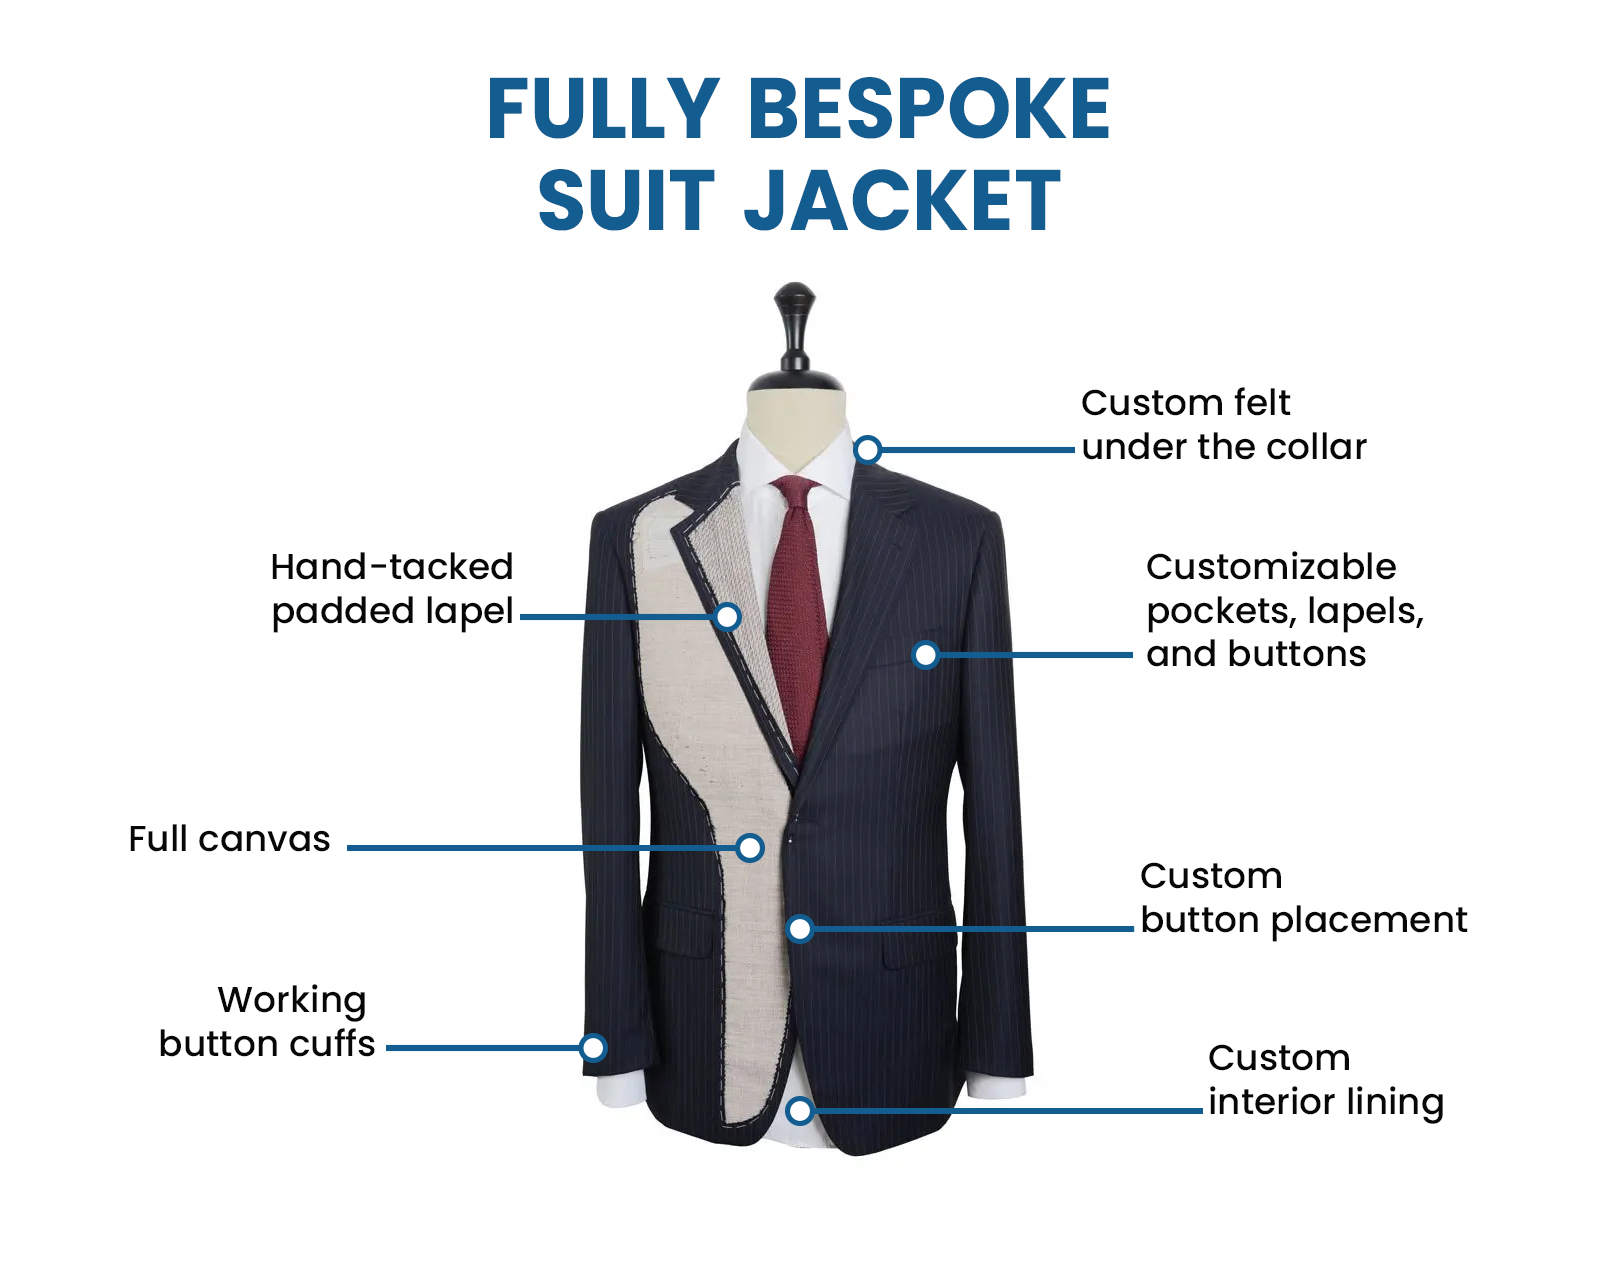 Ready-to-Wear vs. Made-to-Measure vs. Bespoke - Suits Expert